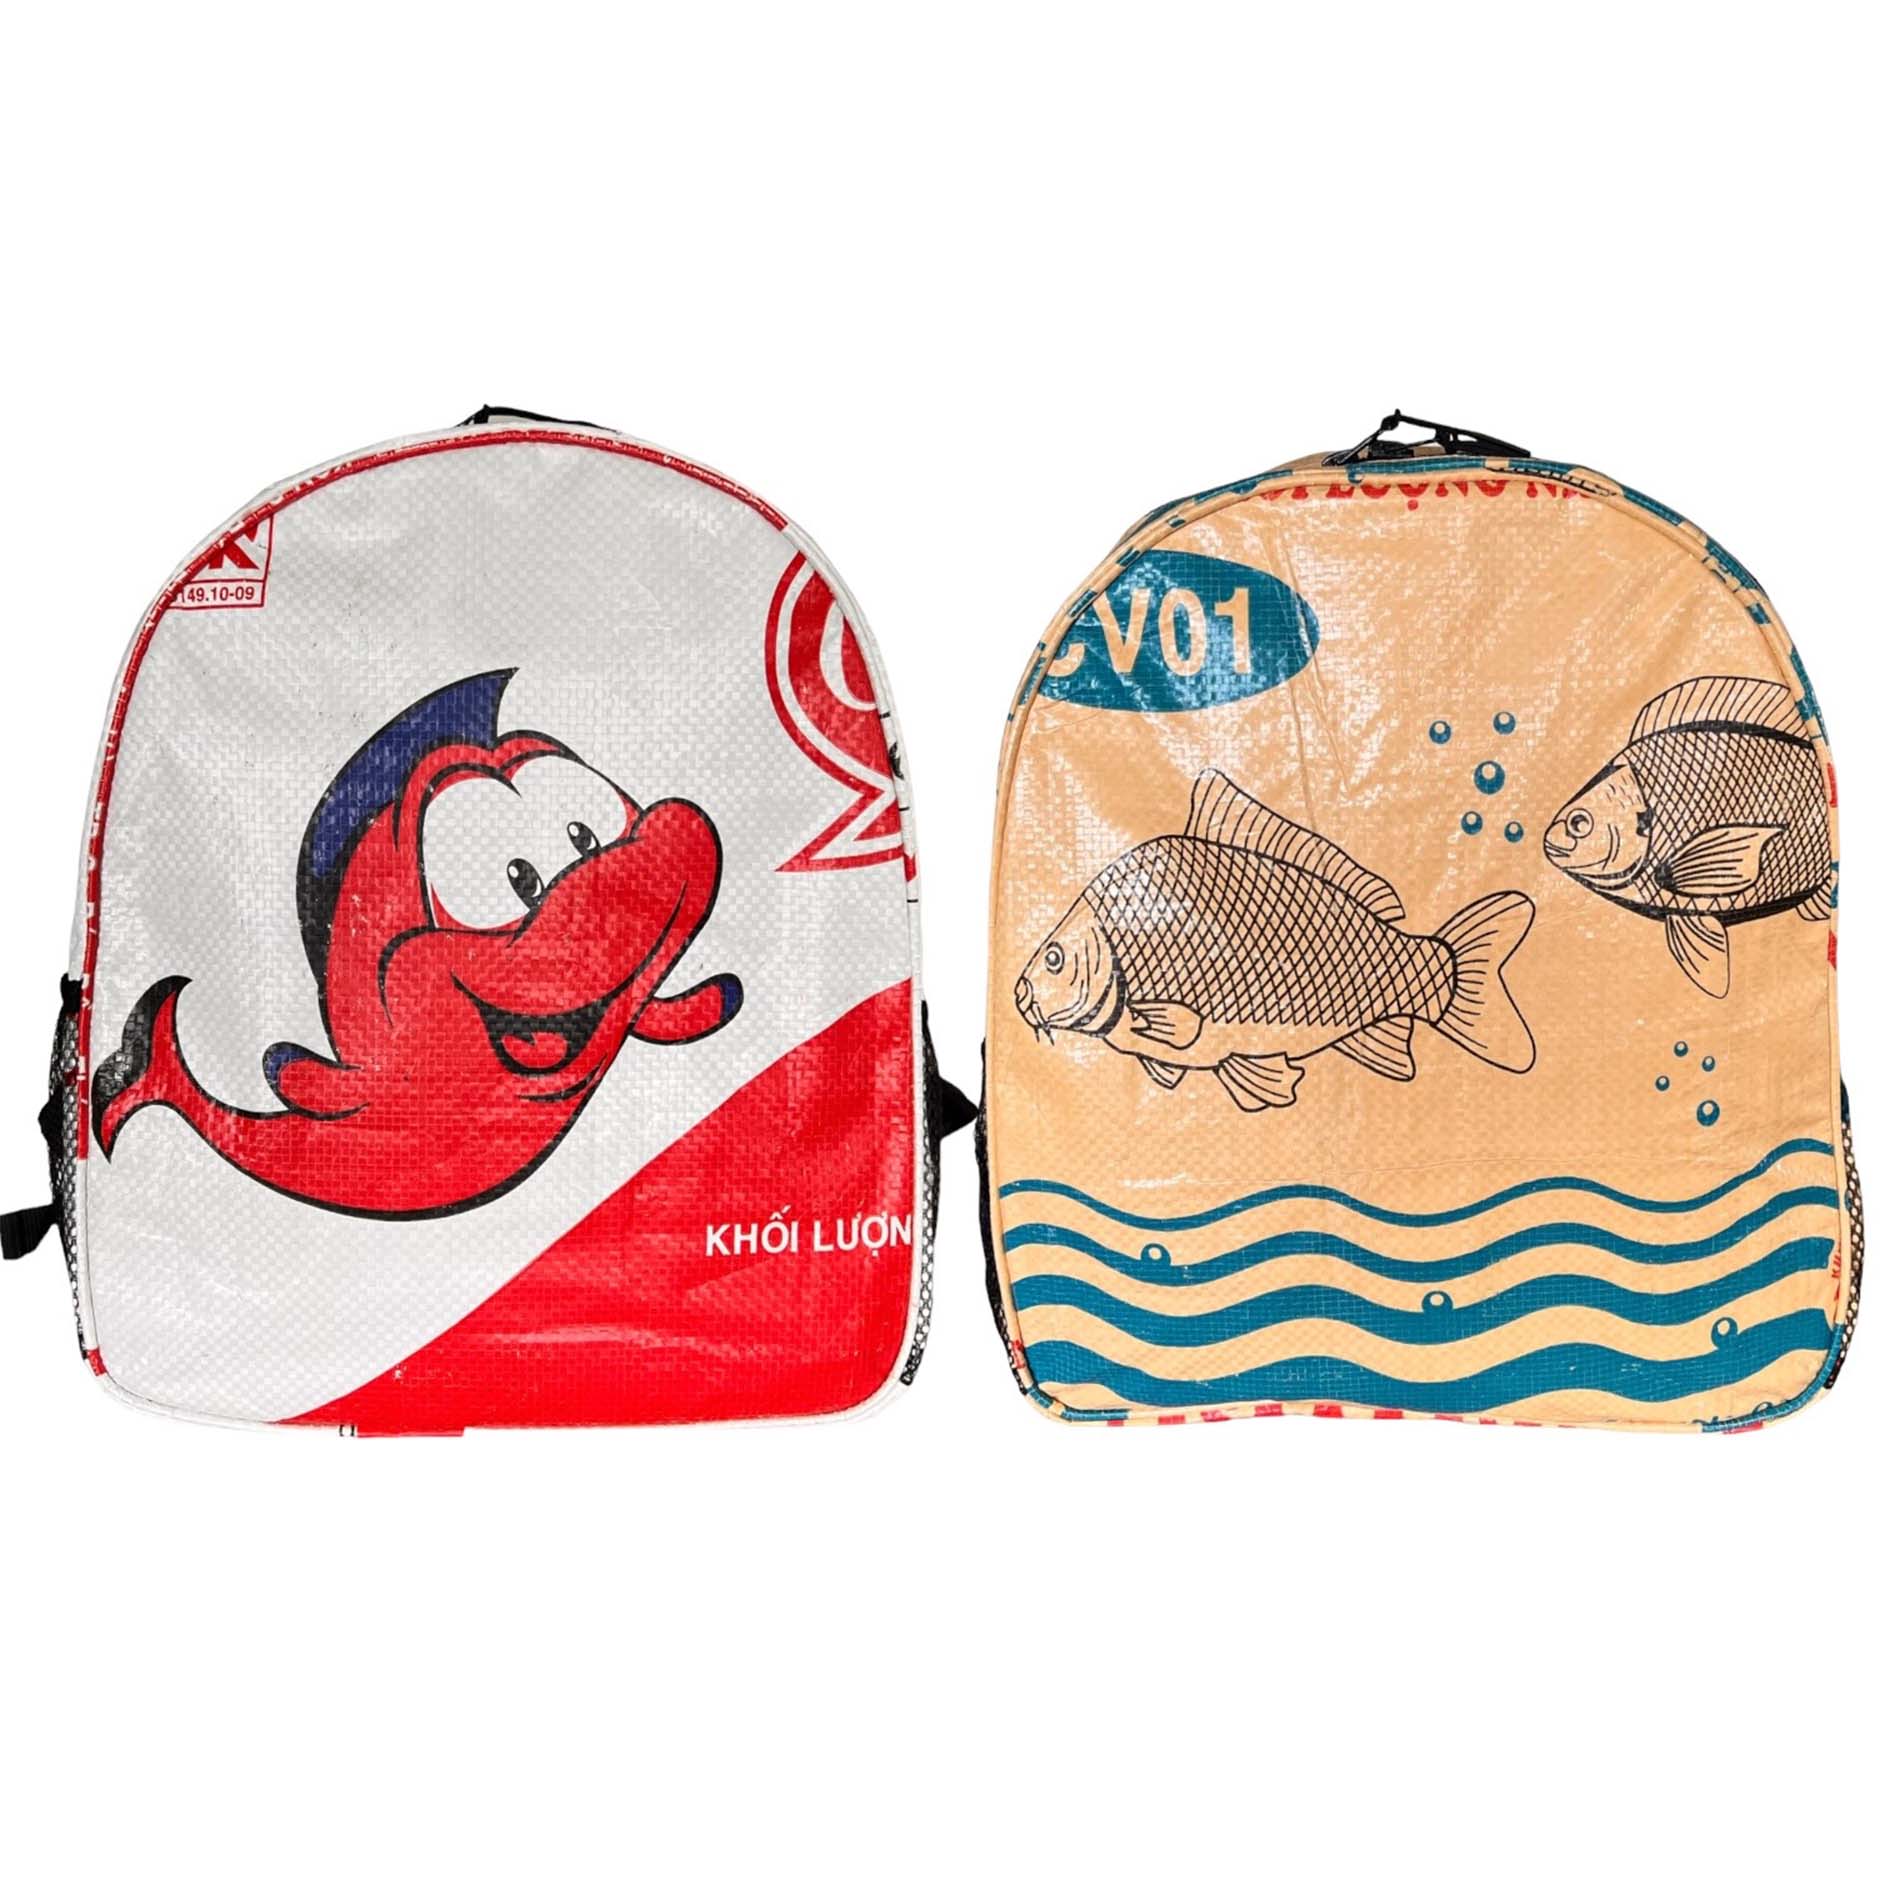 Small recycled material backpack with fish print